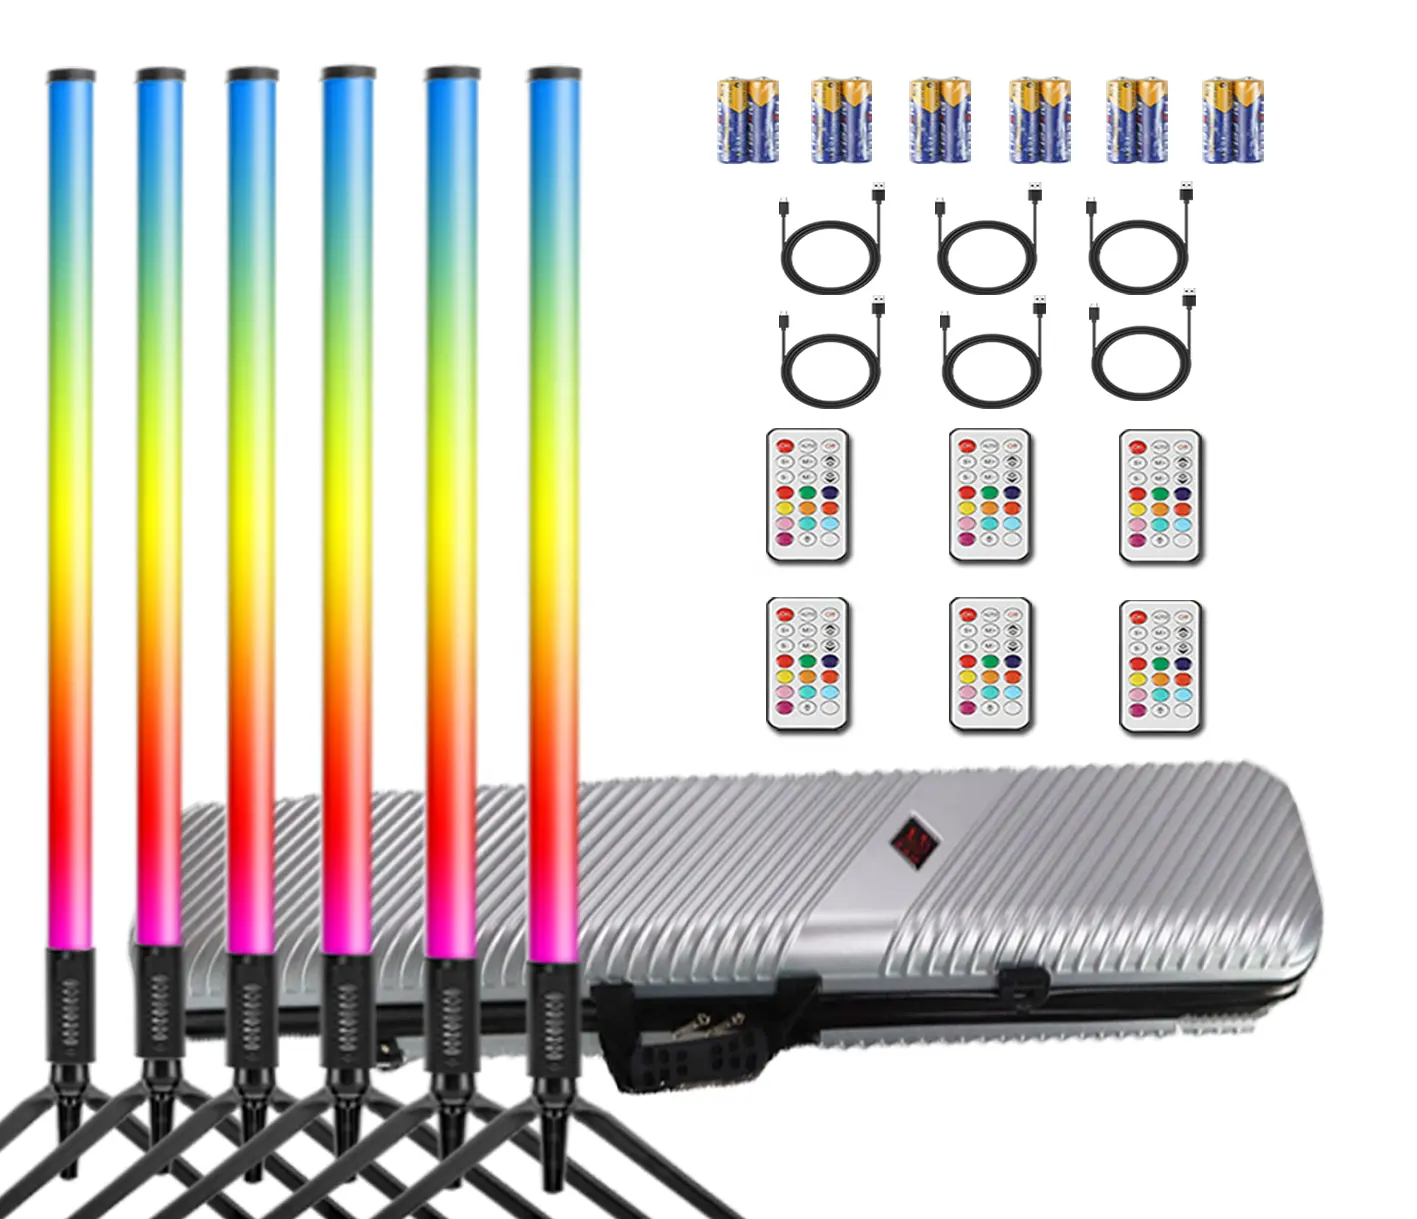 6 Packs TL-130Plus 1.2m 4ft Portable Wireless Rechargeable RGB Led Tube Light With Case For DJ wedding Party Stand Stage Lights